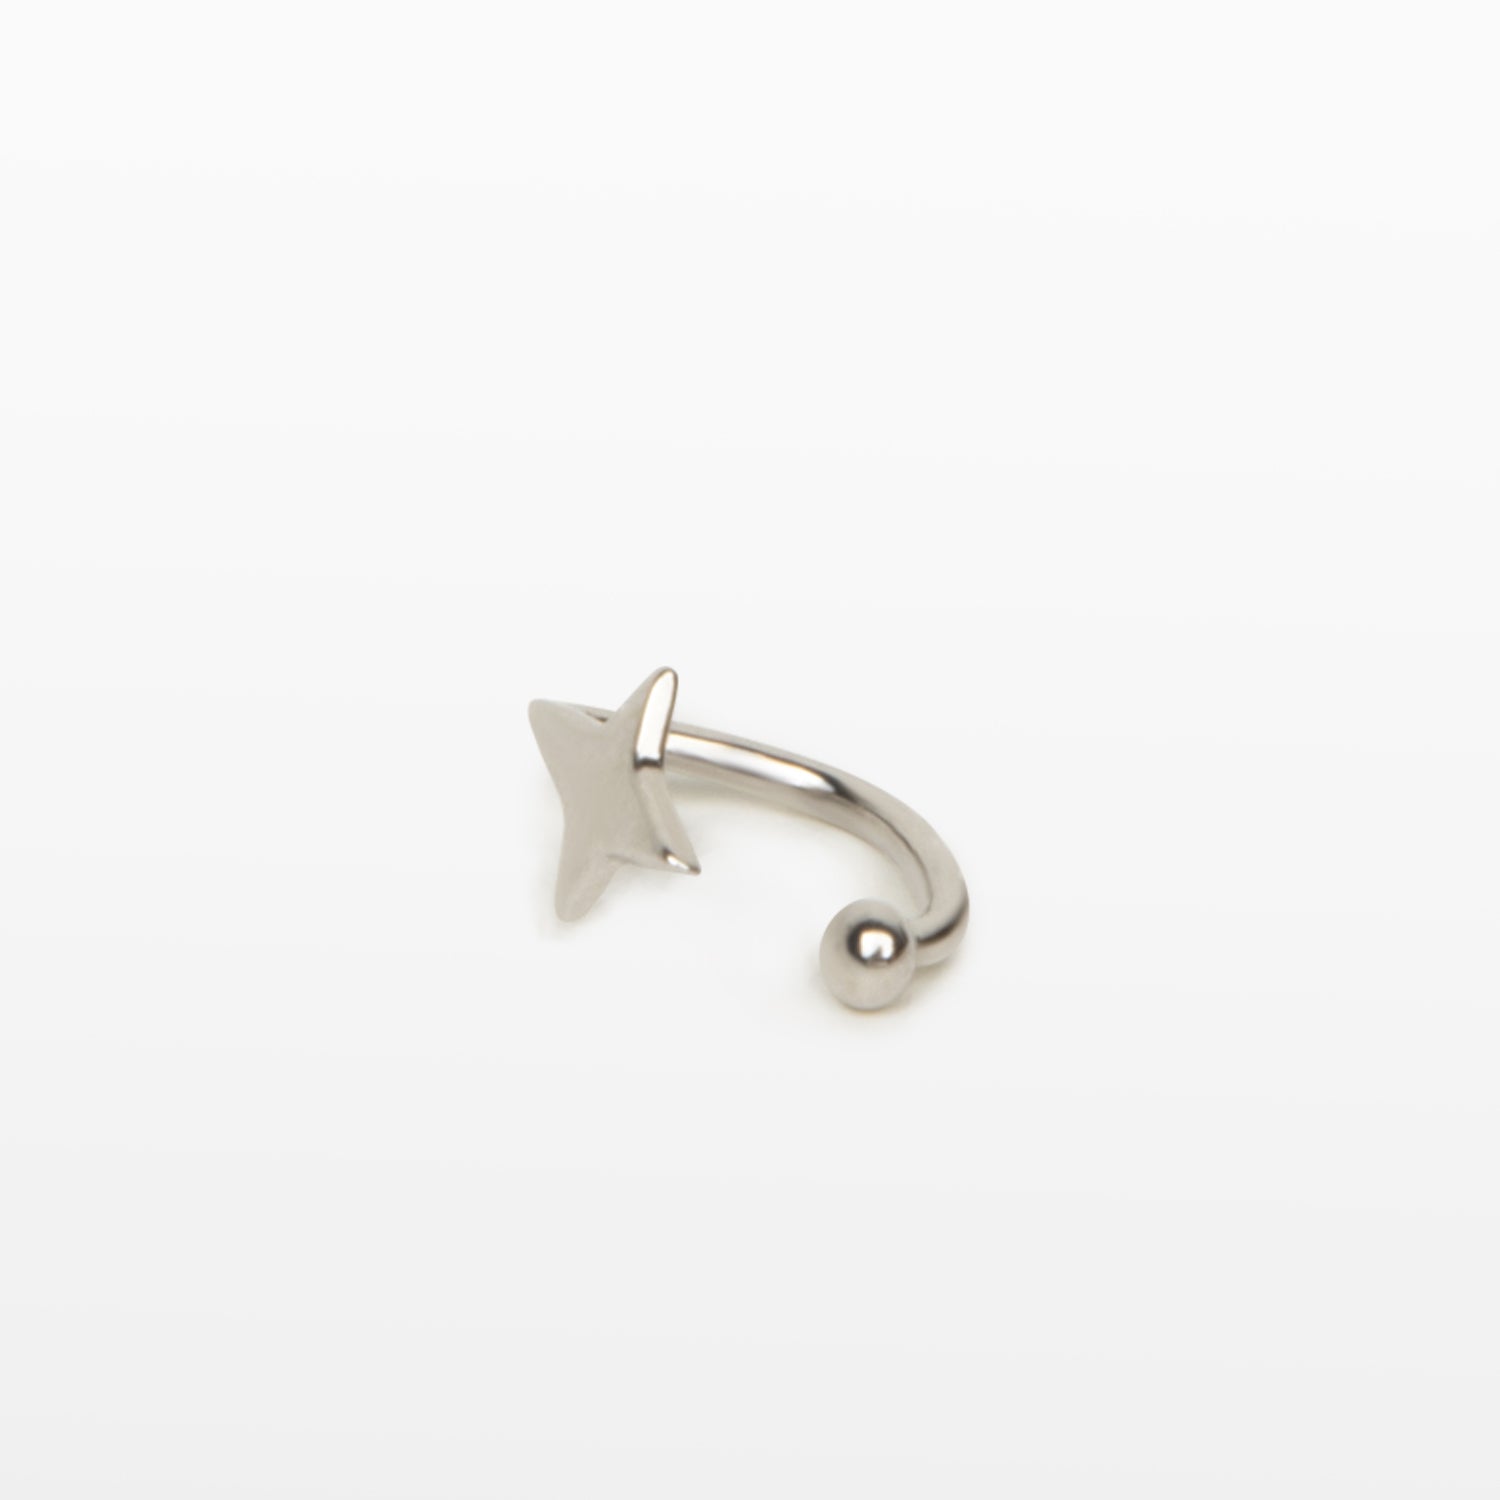 Image of the Castor Ear Cuff is designed for a range of ear types and holds securely in place for up to 24 hours. Featuring a silver plated copper construction with a 14mm length and 7mm width, the cuff can be adjusted to fit most ears by gently squeezing on the helix. Single item sold.